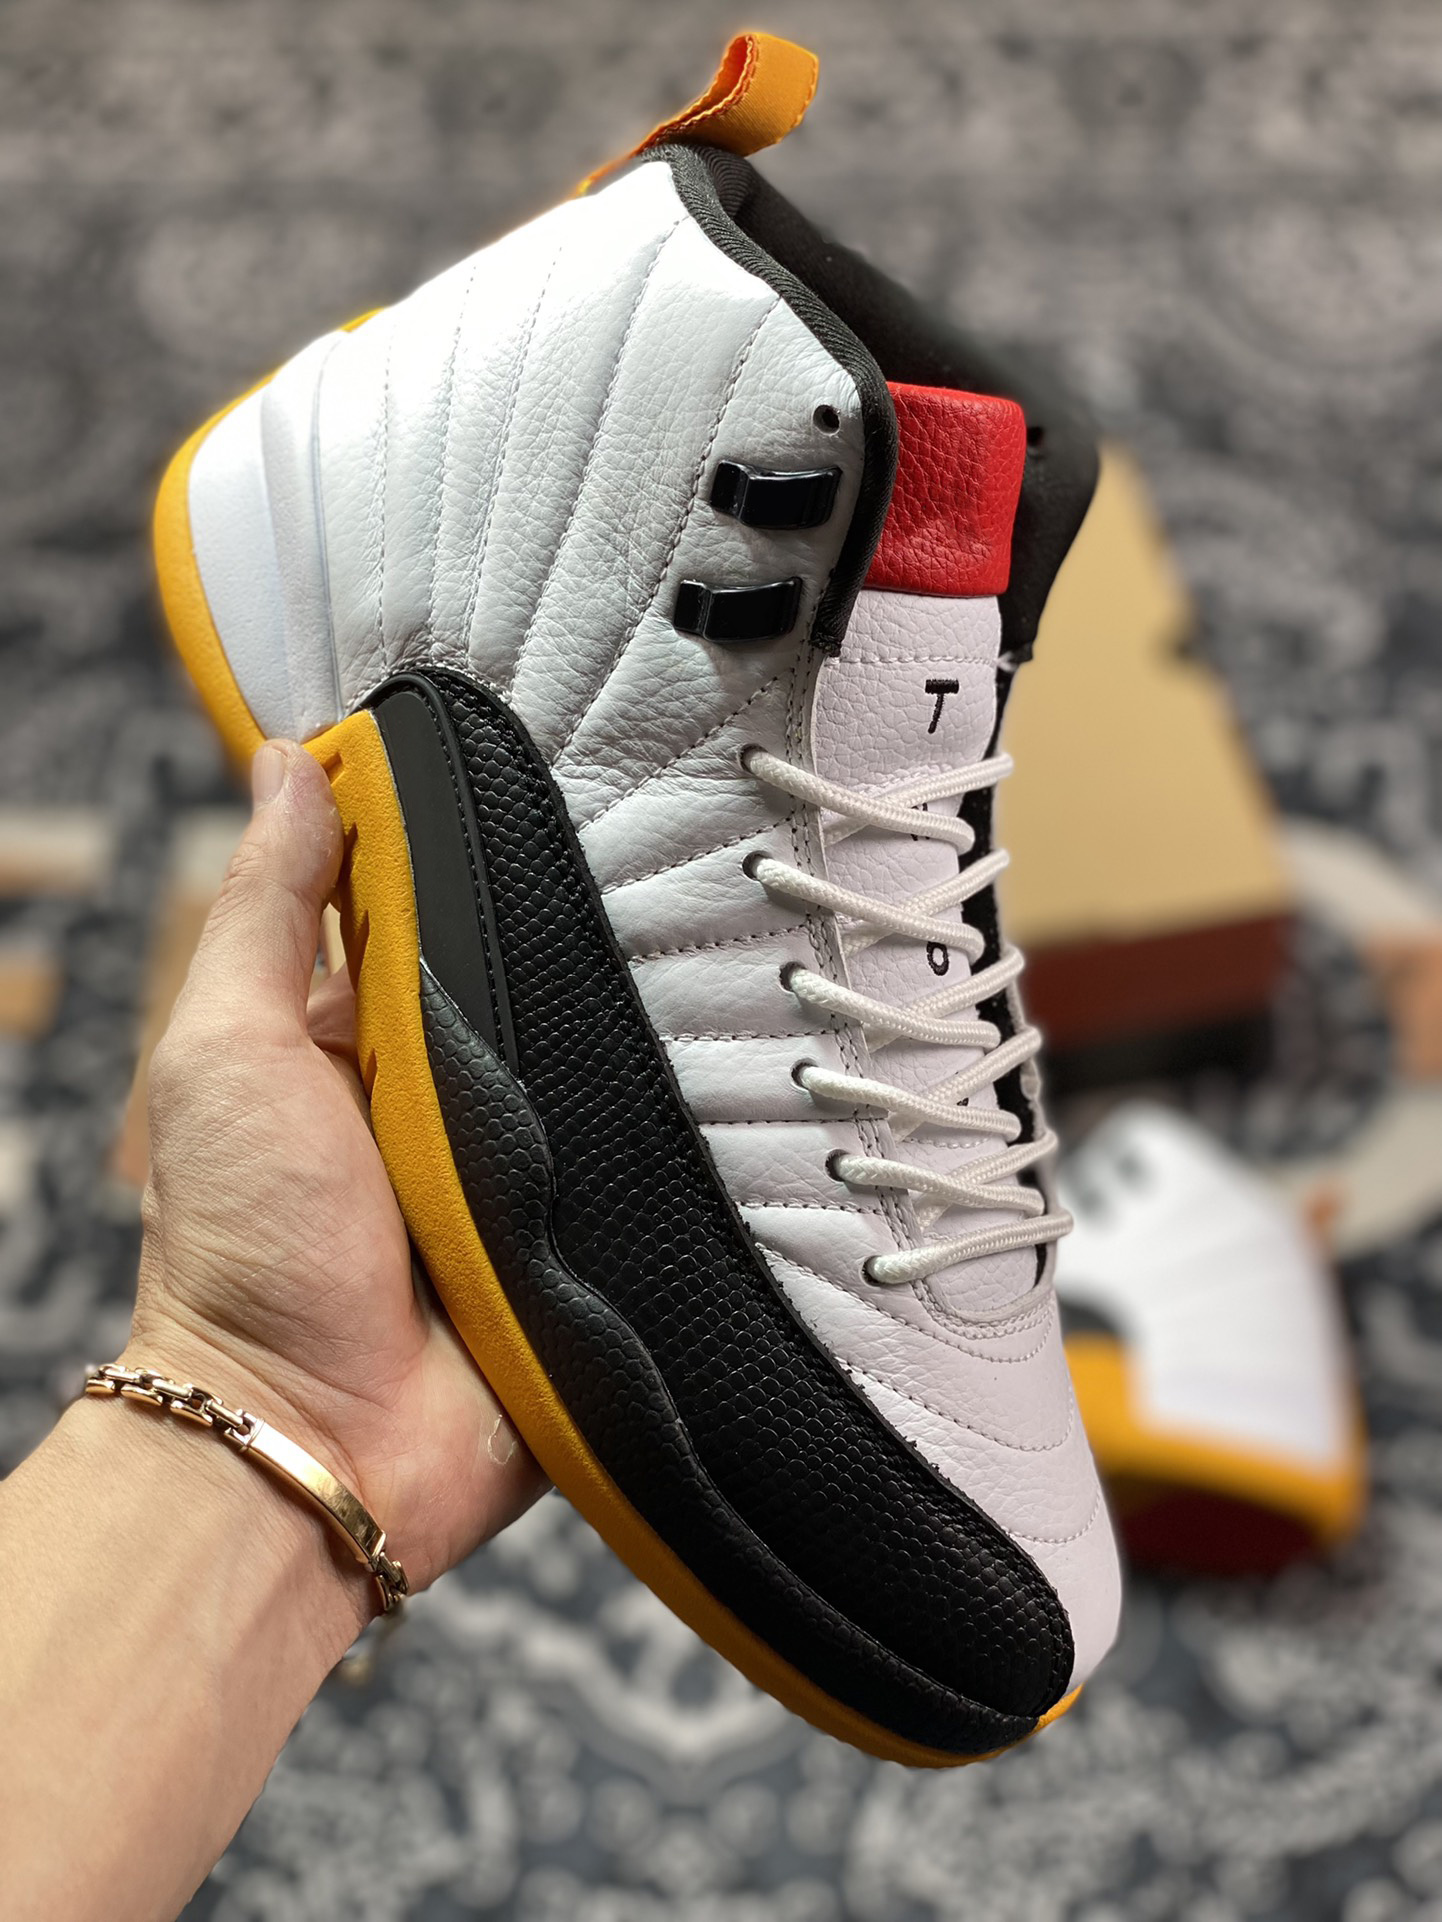 

Shoes Jumpman Authentic 12 25 Years in China Sneakers Black Taxi Varsity Red 12S Flu Game Brilliant Orange Retro Real Carbon Fiber Sports, #1 stealth